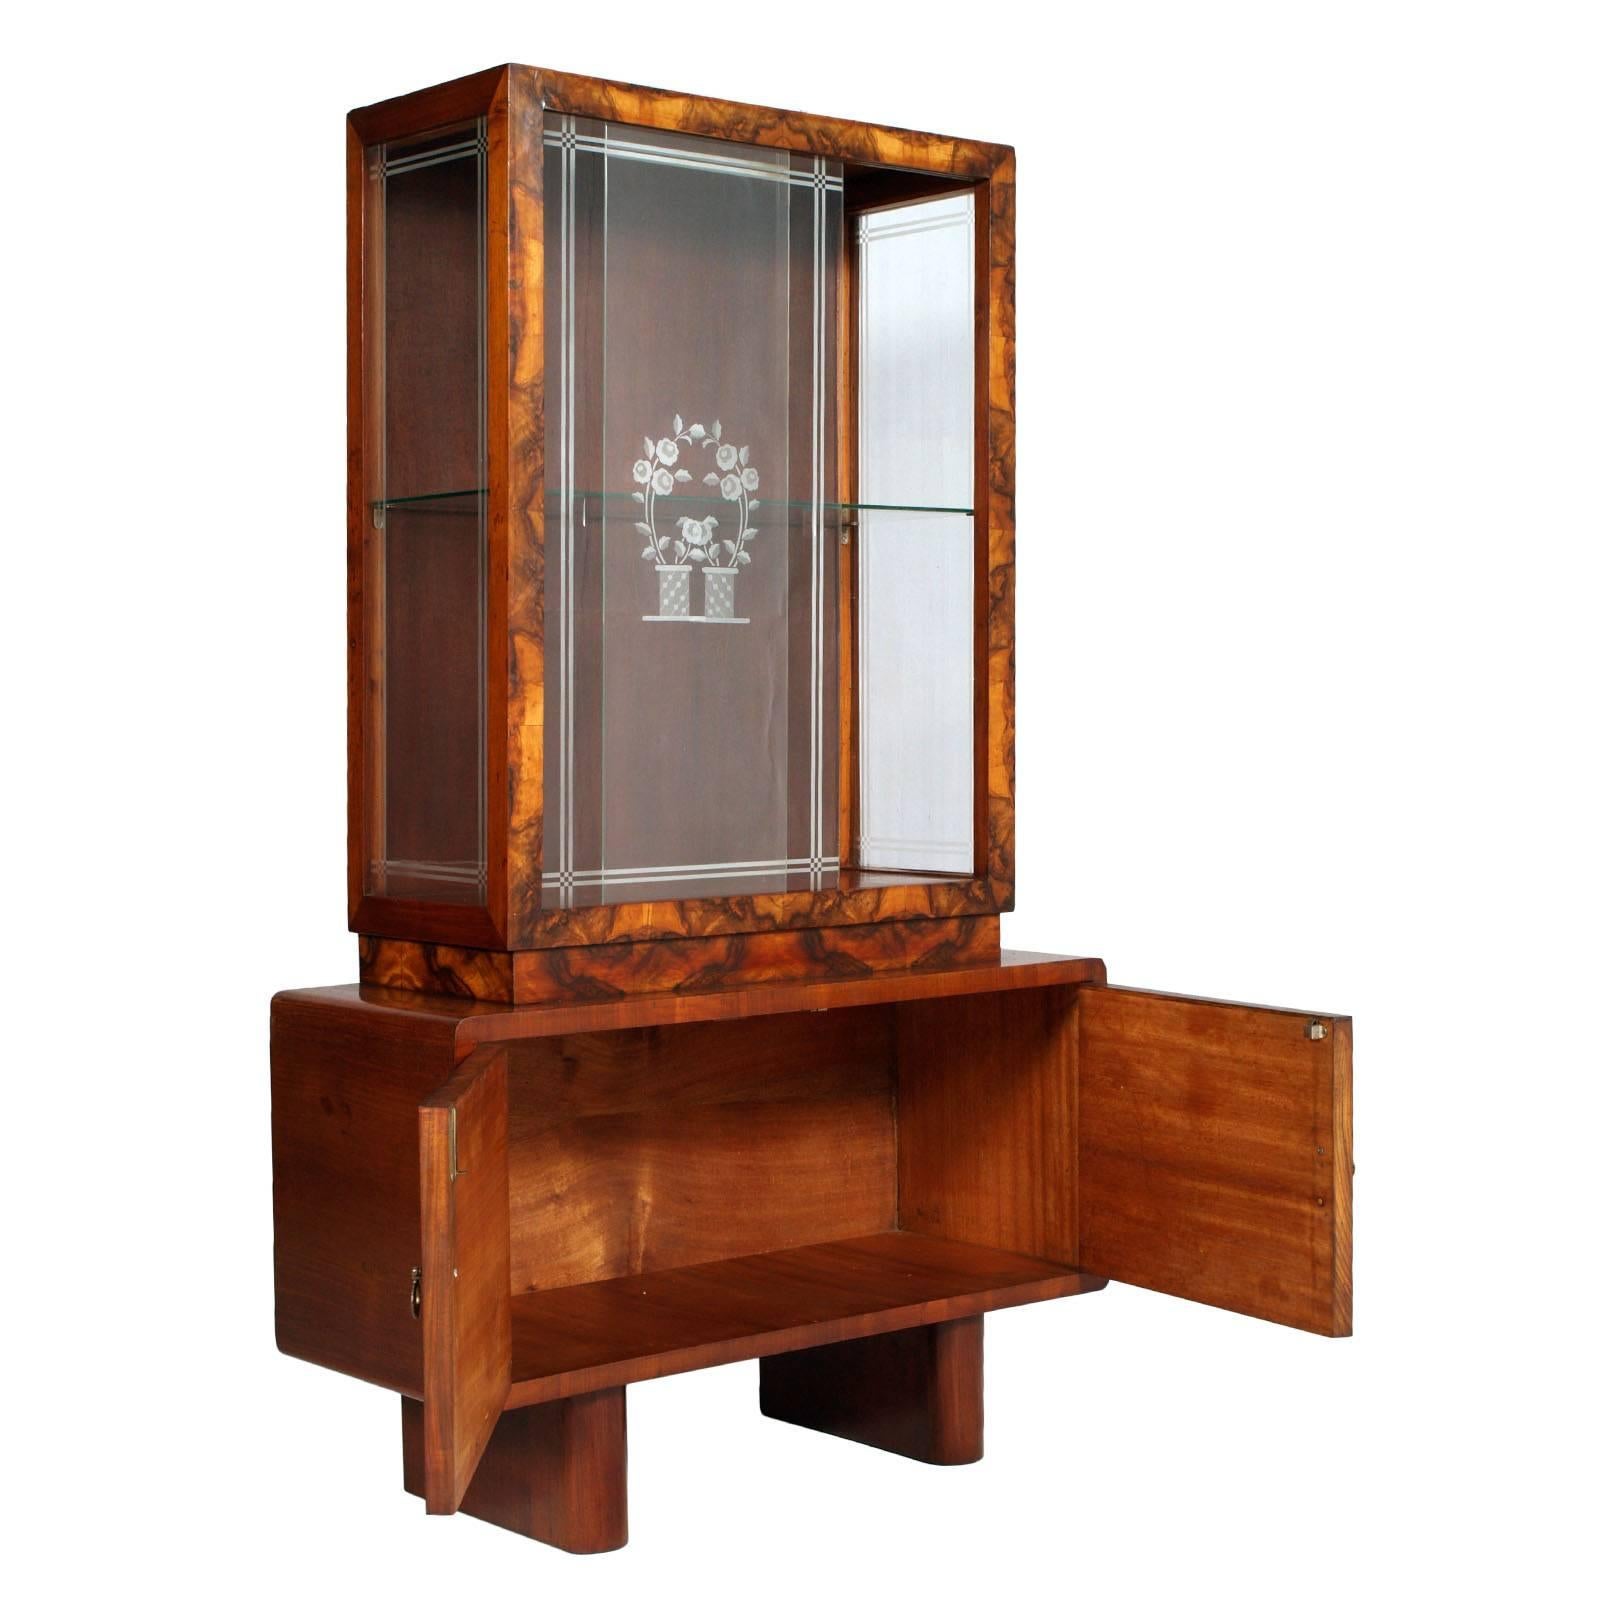 Fabulous Art Deco Mid-Century vitrine cupboard dresser by Meroni & Fossati, Lissone, in burl walnut  and sliding engraved crystals. Made in the 1930s Gio Ponti attributed

Measure in cm : D 40 W 100 H 169.